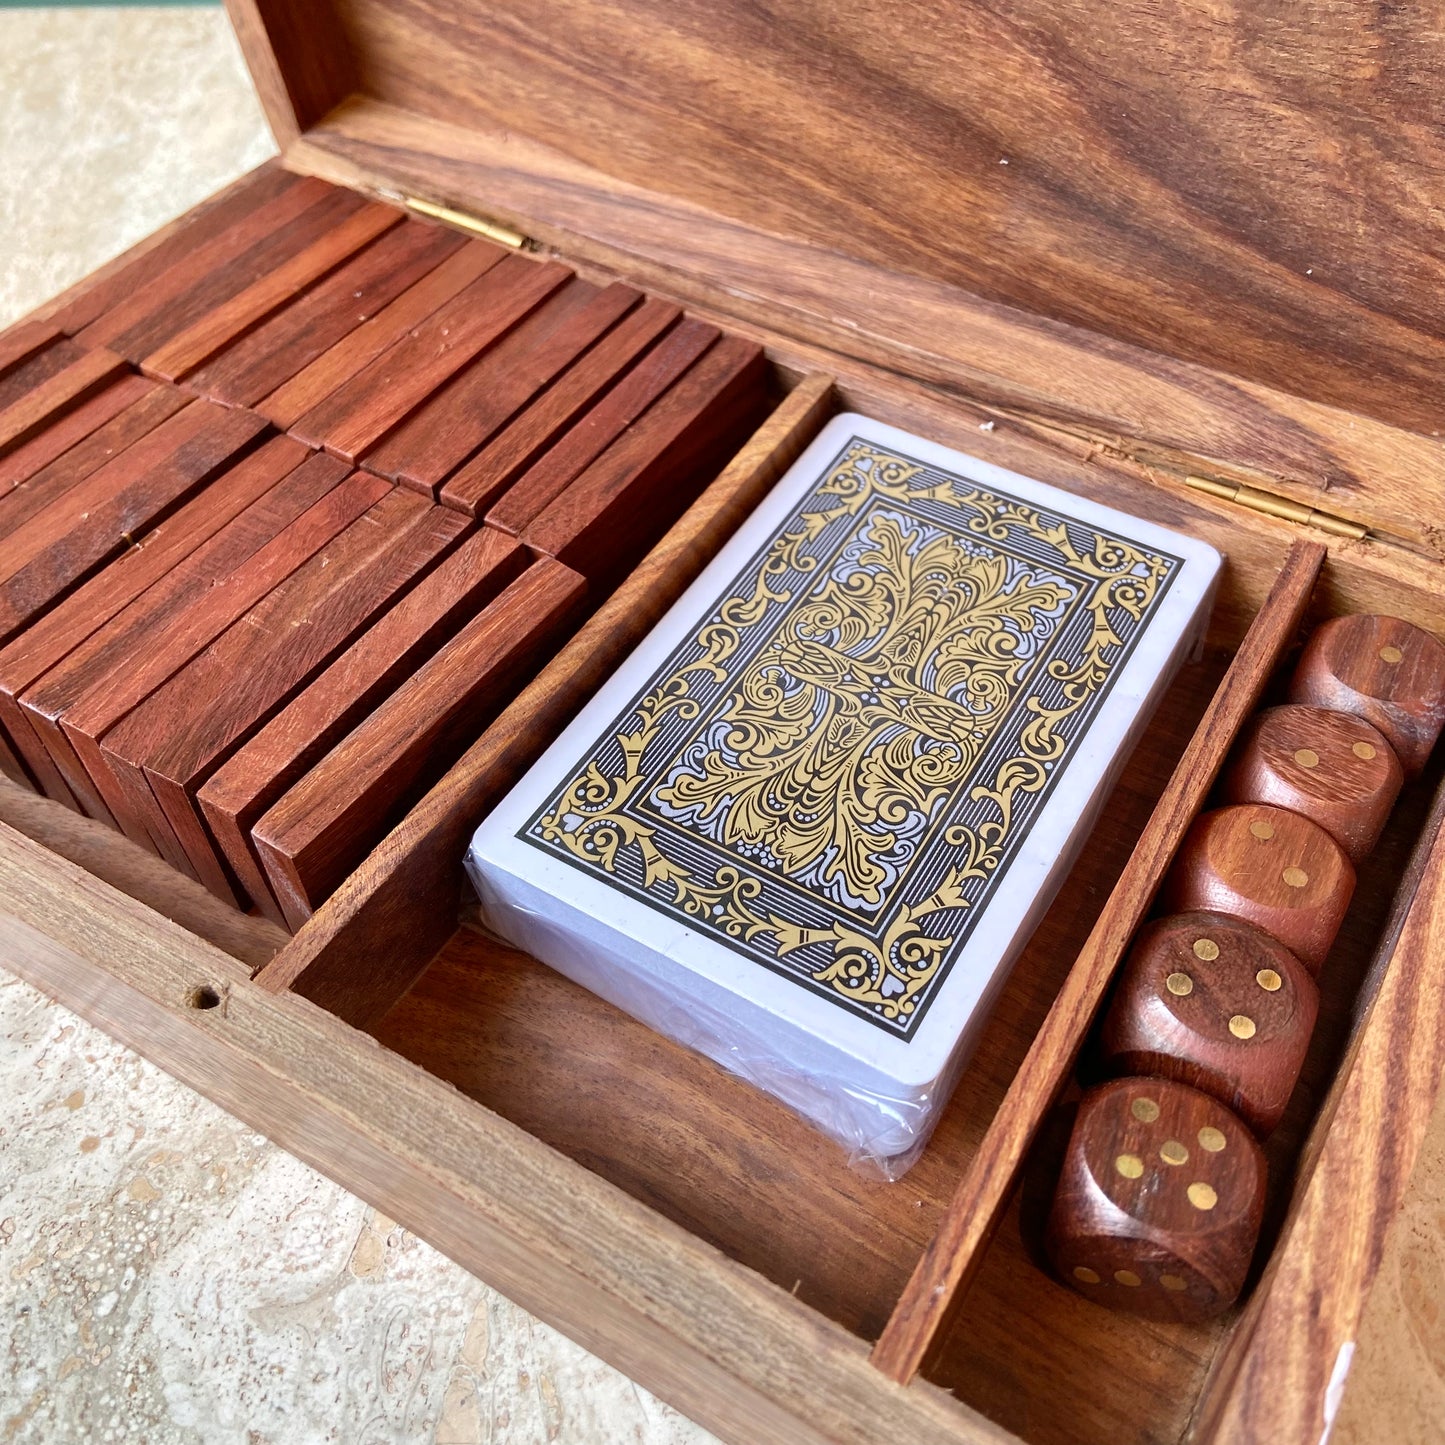 Wood and Brass Game box with Cards, Dice & Dominos